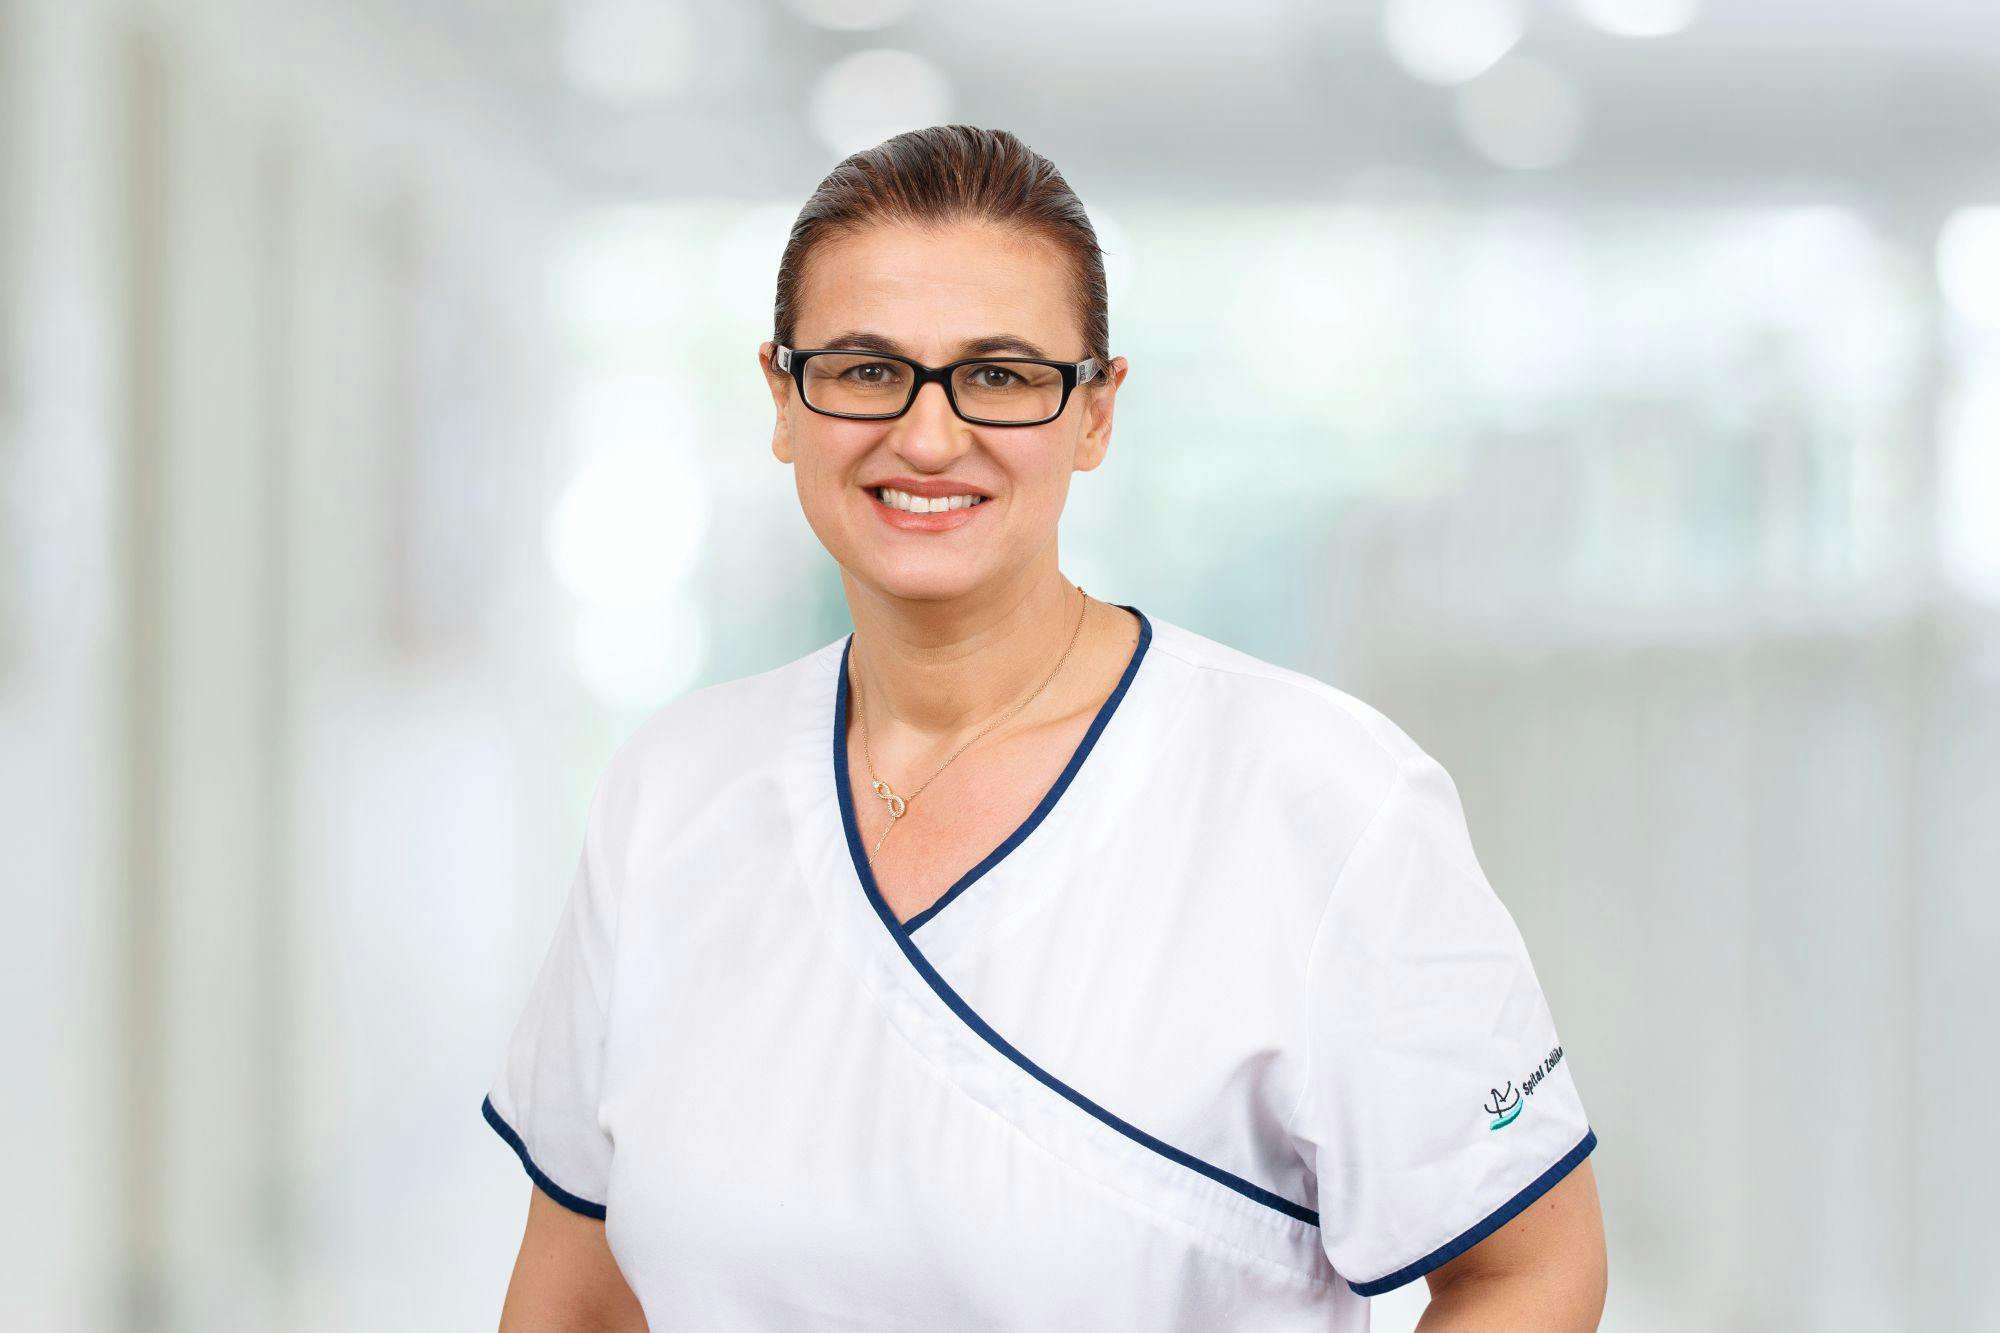 Smiling medical professional in white clothing with glasses.